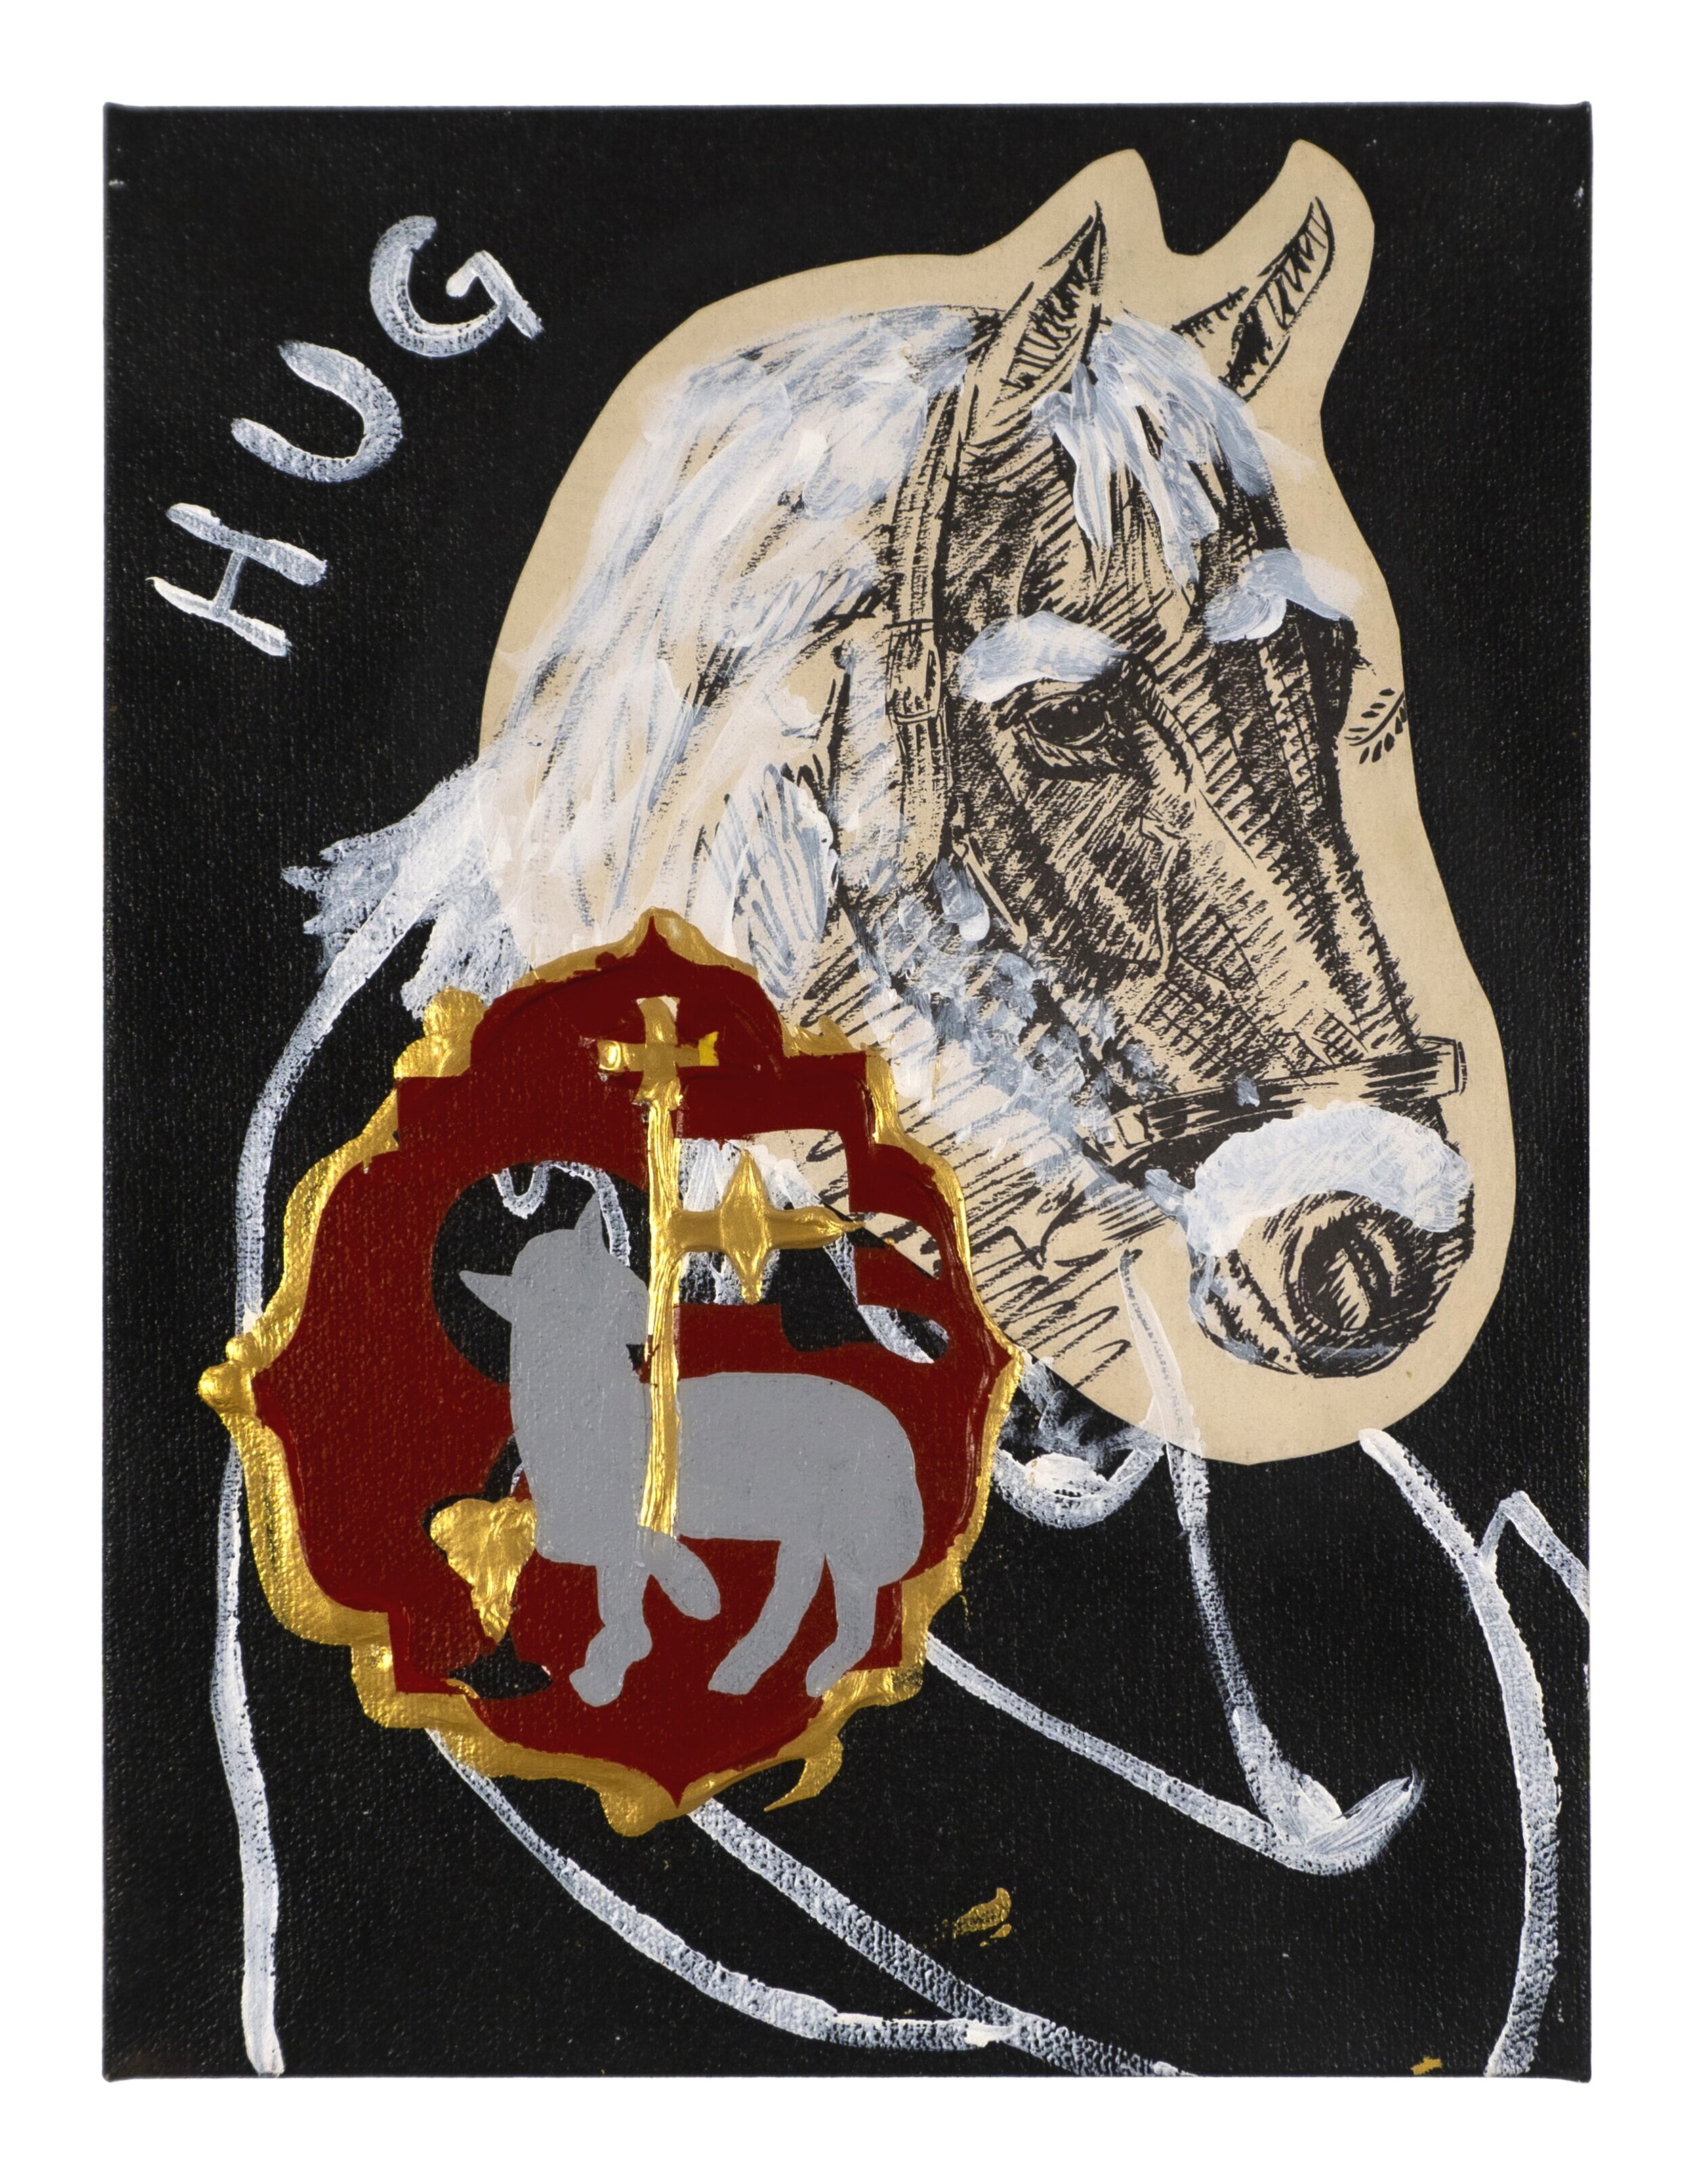   Horse Hug  Acrylic and collage on canvas 12 x 9 inches 2019 